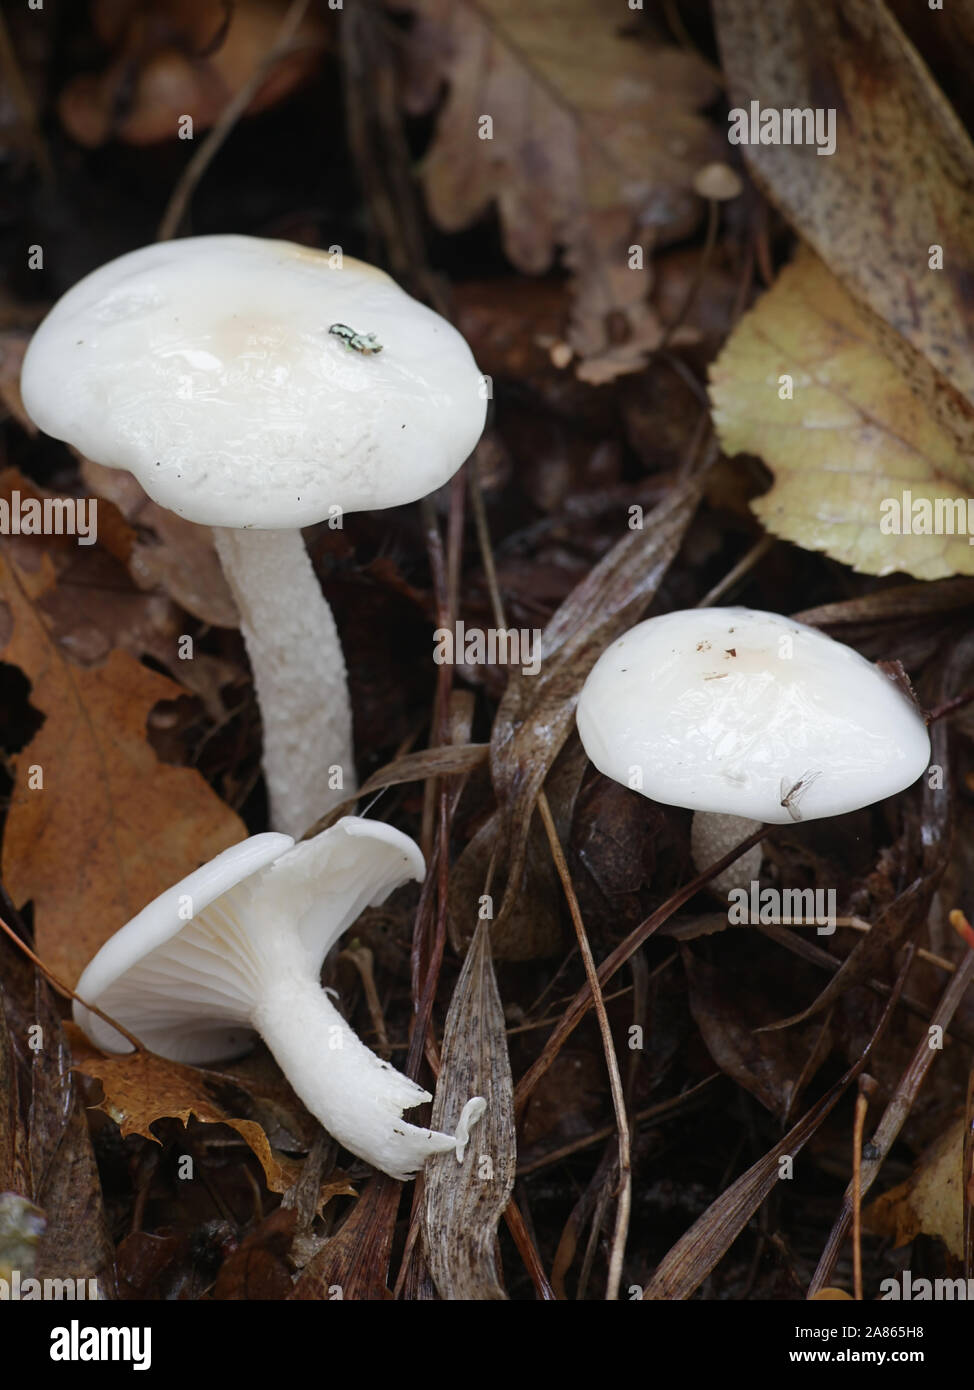 Hygrophorus hedrychii, known as Sweet woodwax, wild mushroom from Finland Stock Photo